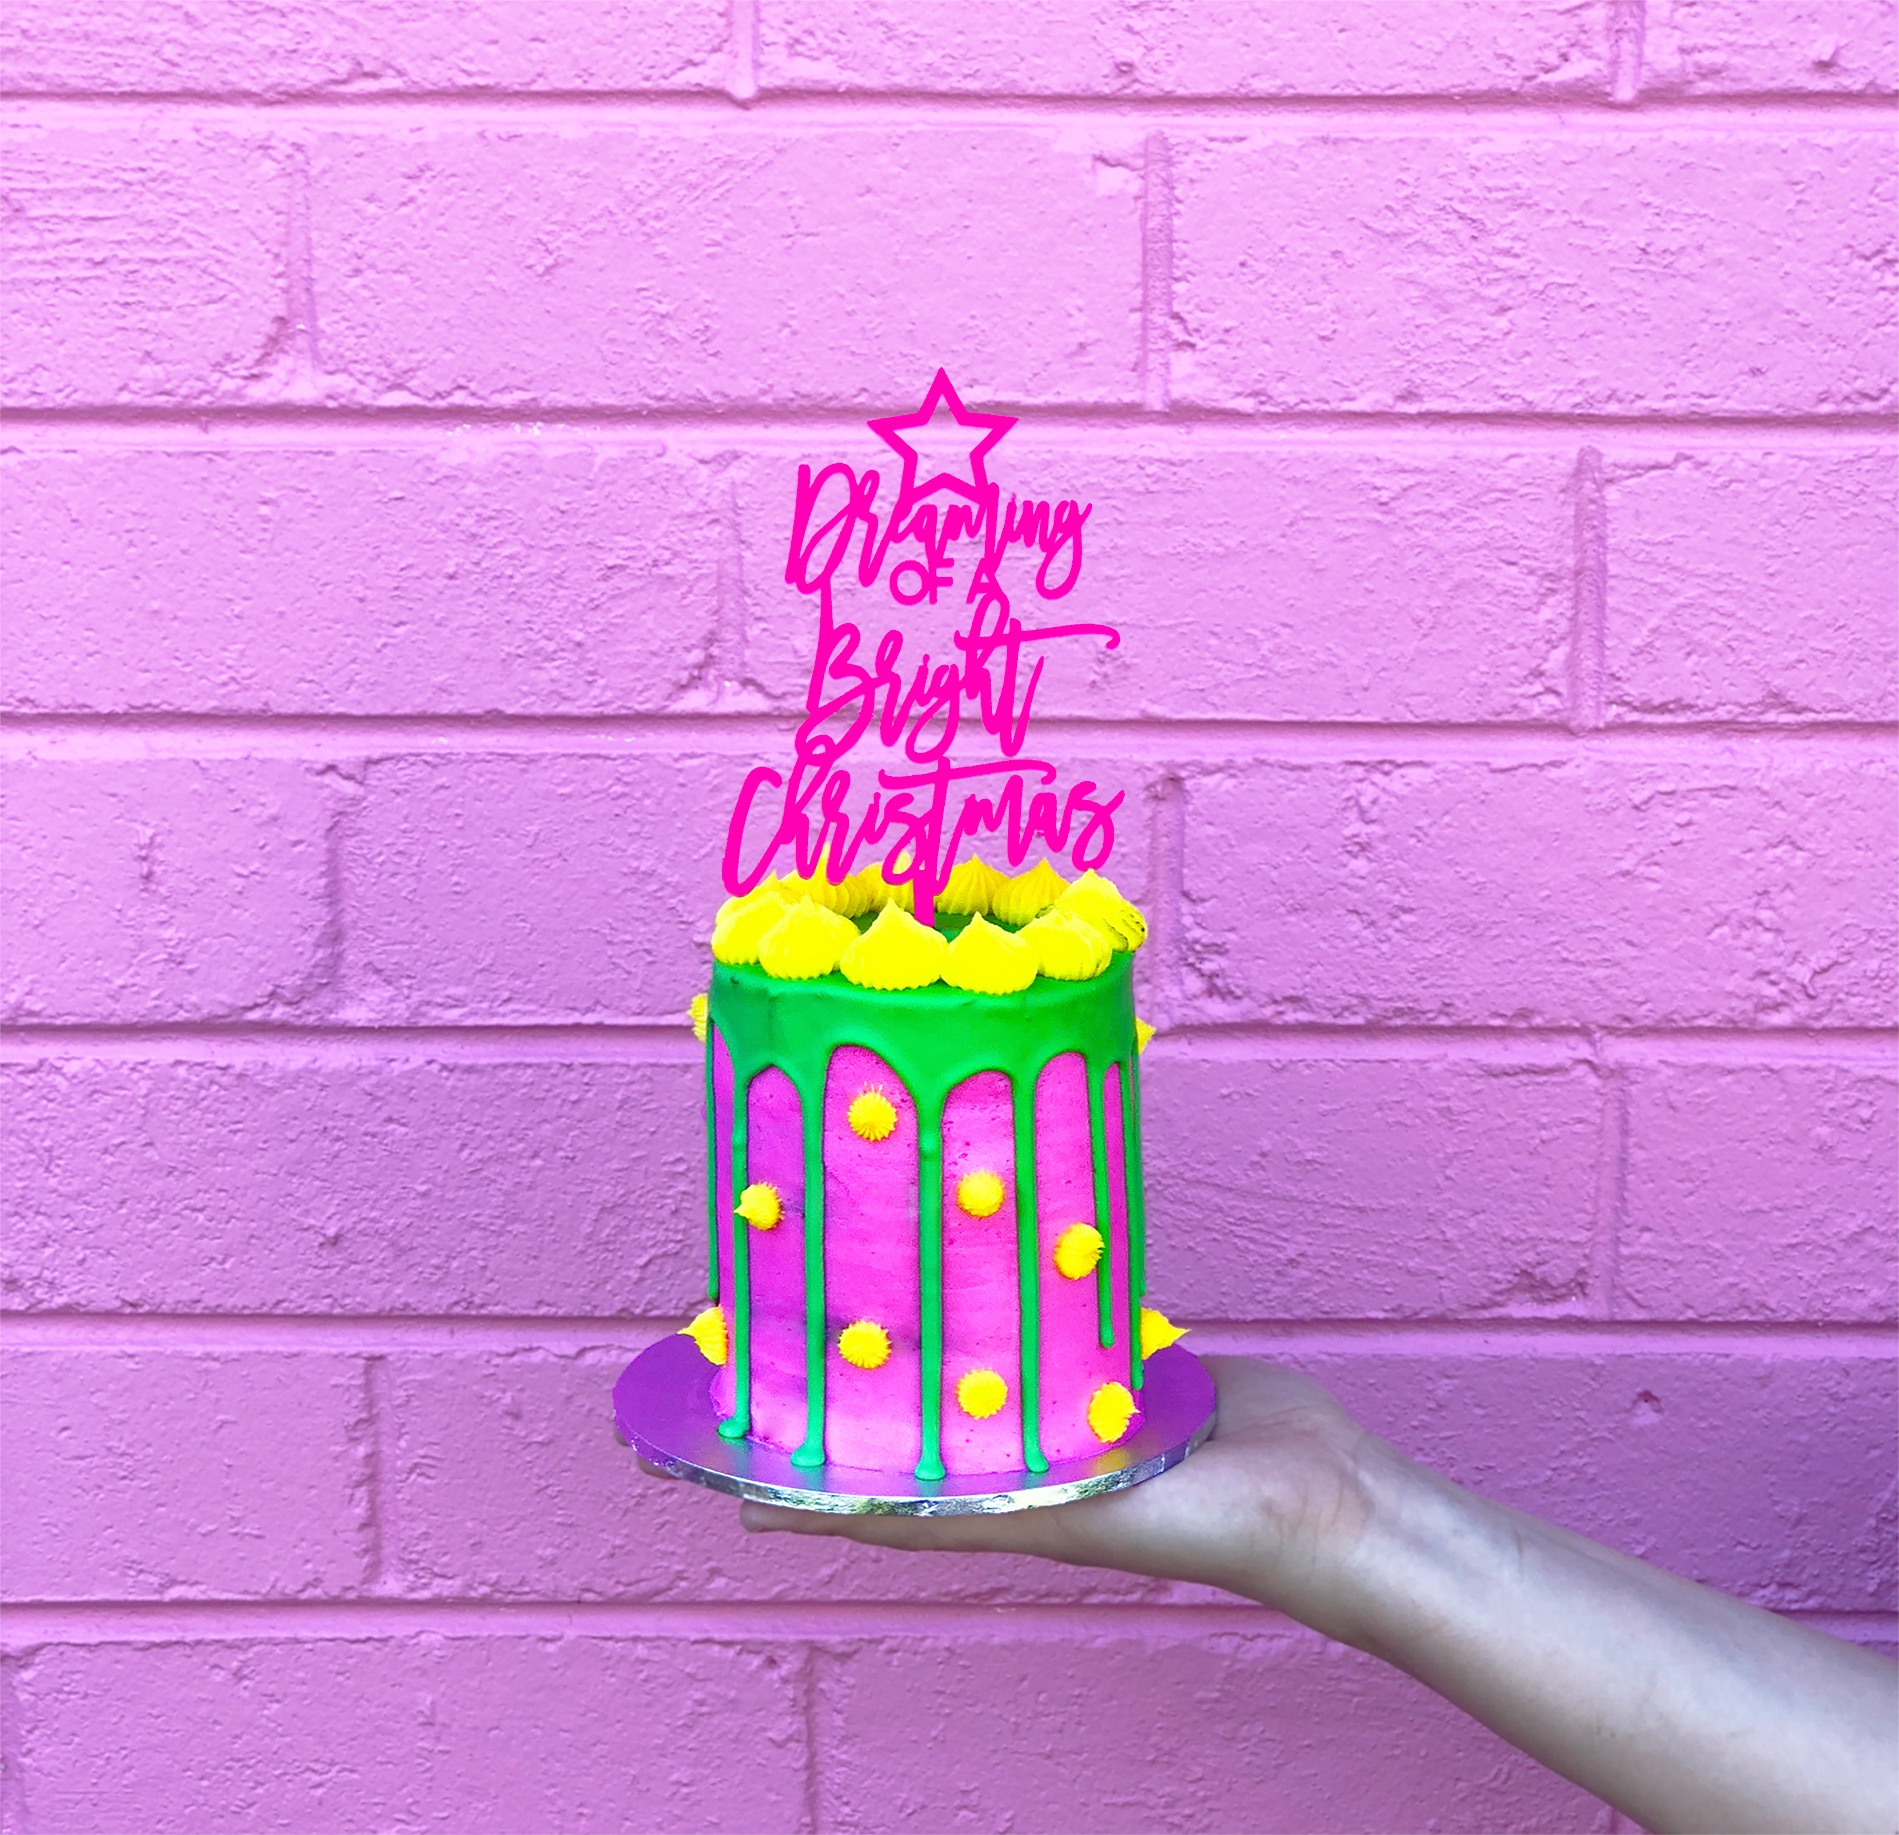 Mini neon cake and Christmas cake topper against a pink wall